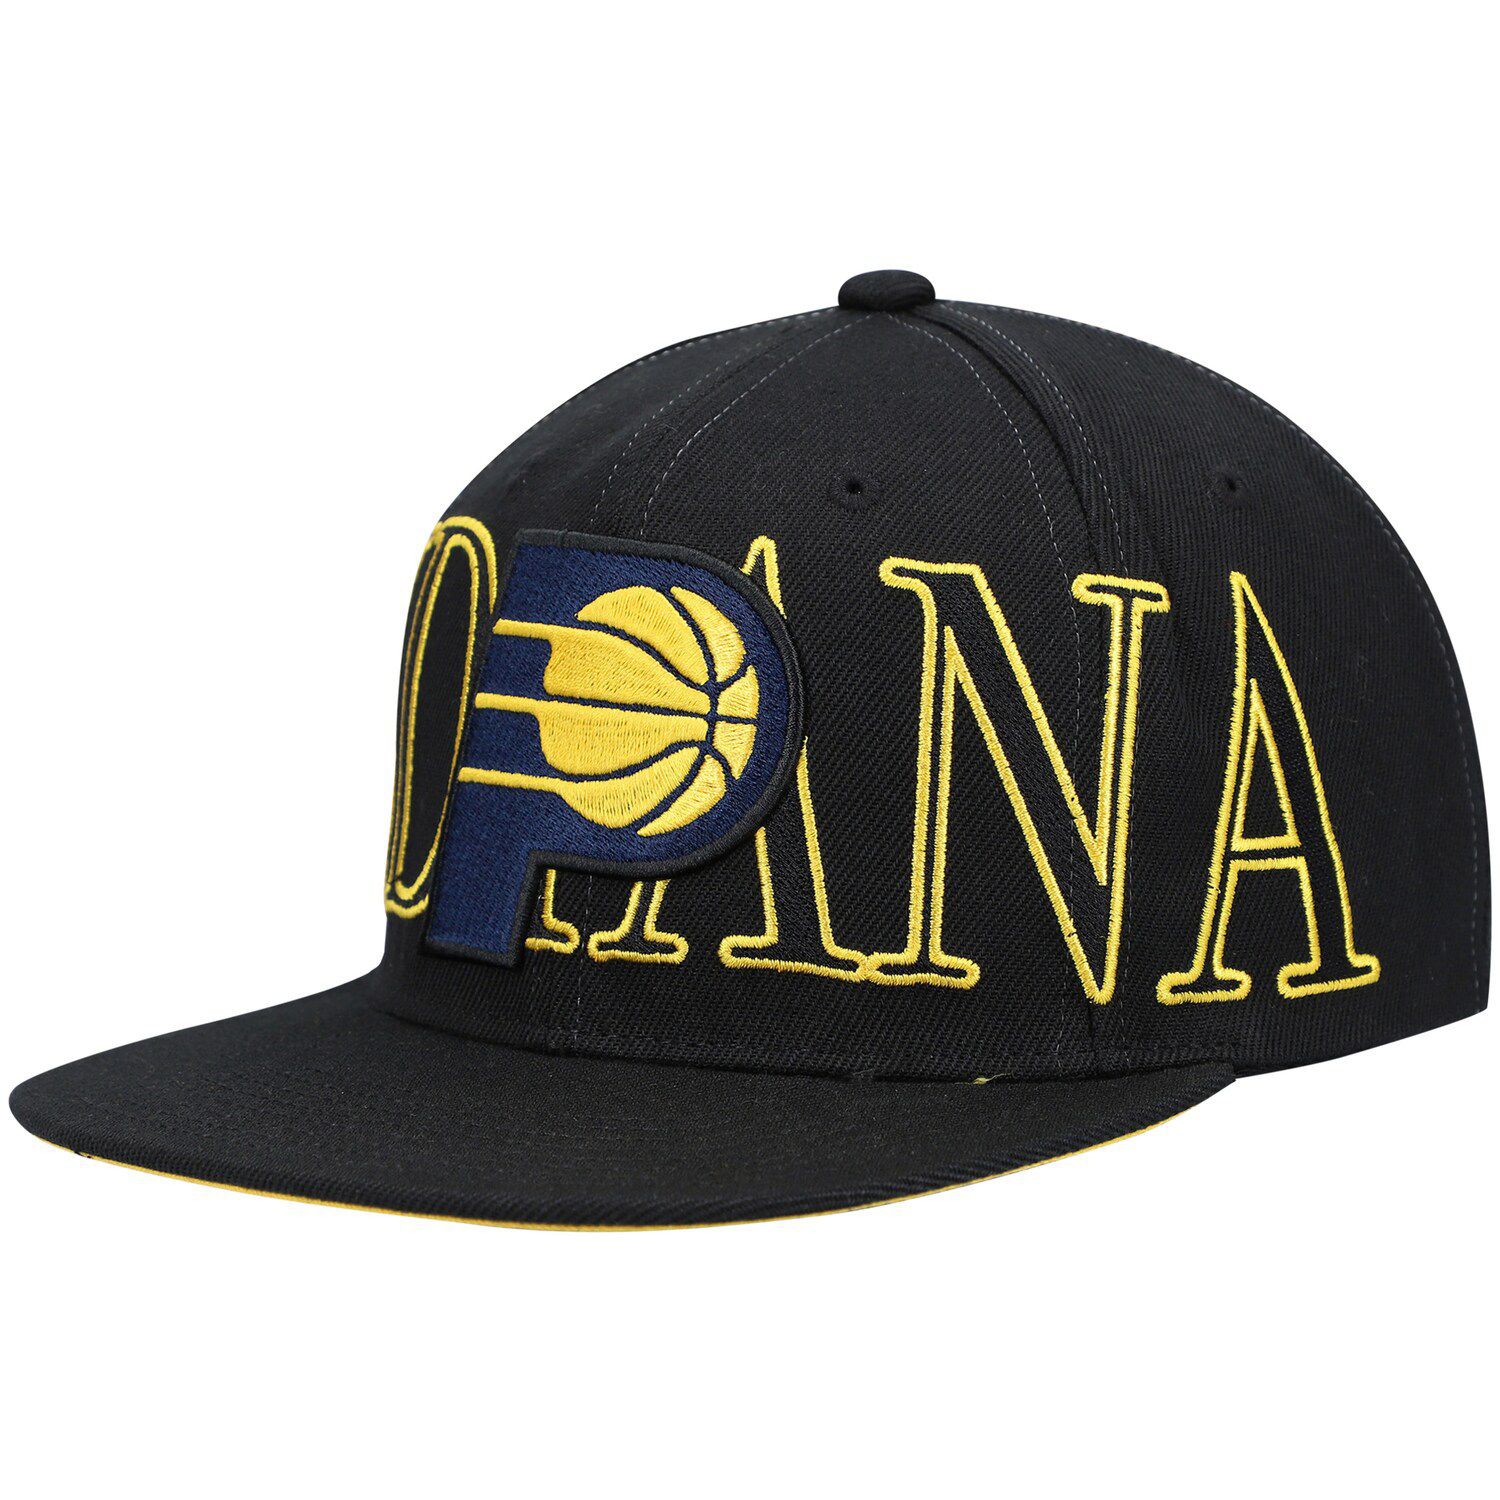 Image for Unbranded Men's Mitchell & Ness Black Indiana Pacers Winner Circle Snapback Hat at Kohl's.